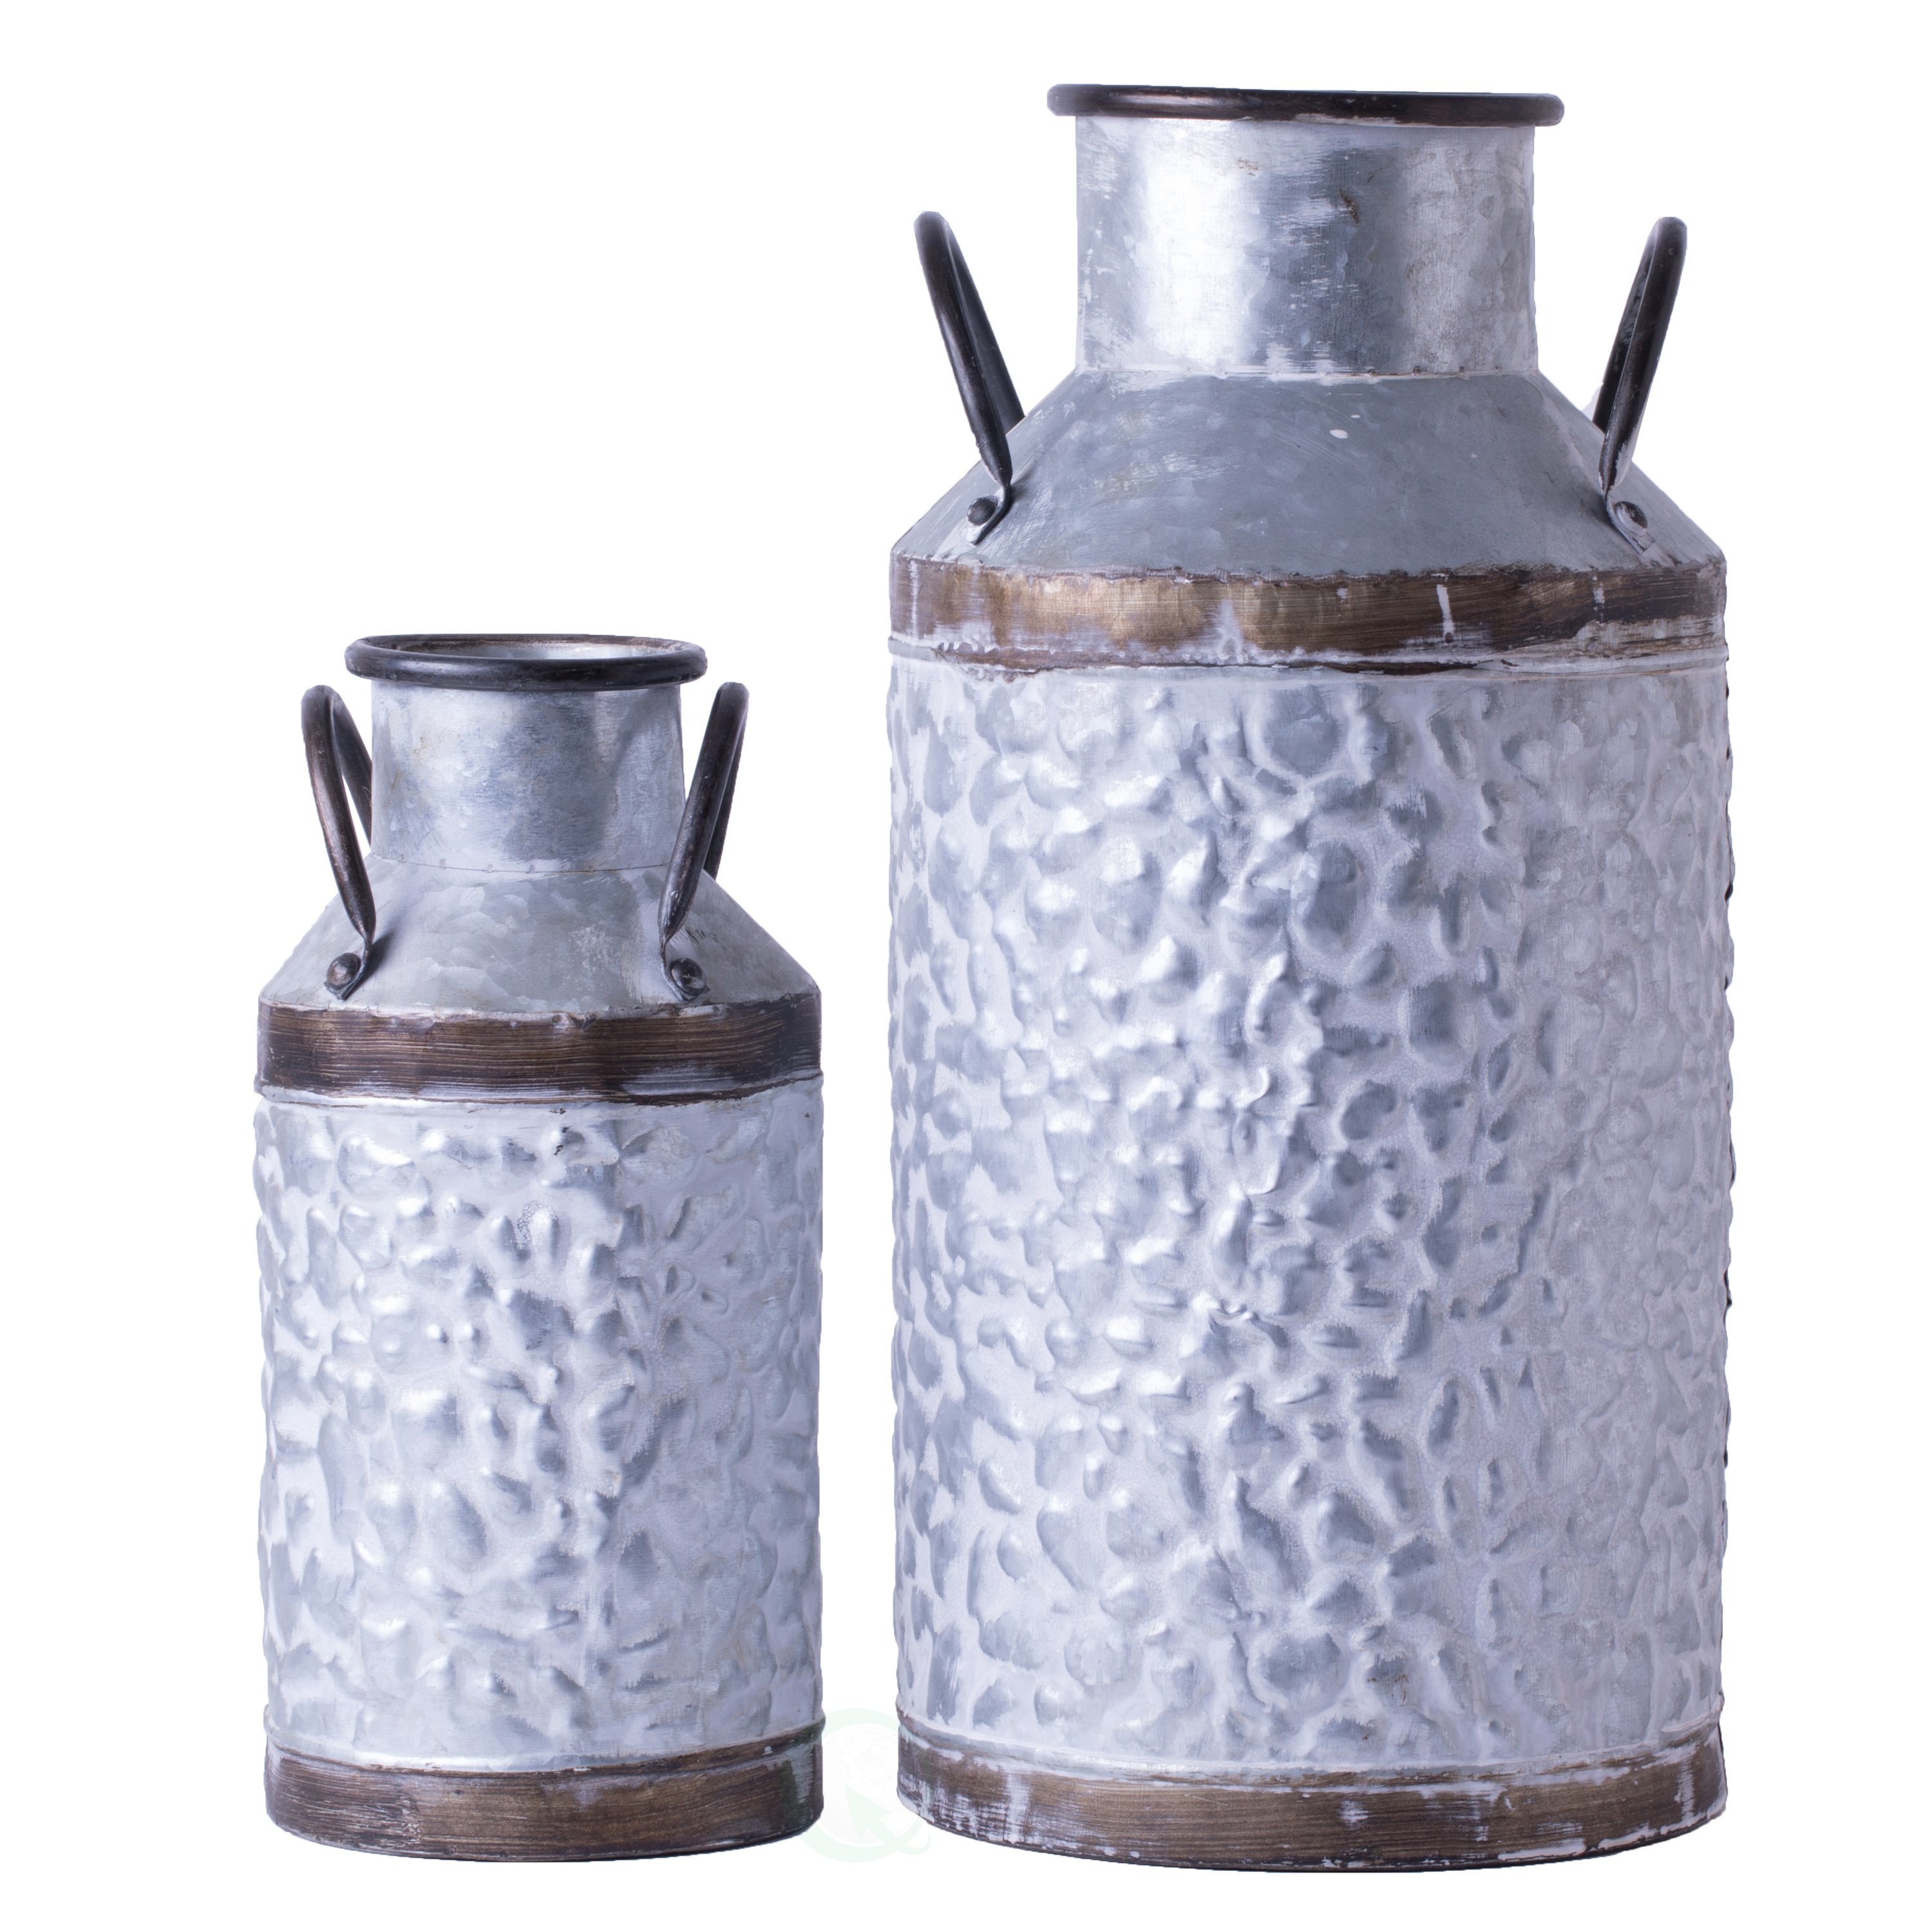 Rustic Farmhouse Style Galvanized Metal Milk Can Decoration Planter And Vase, - Set Of 2